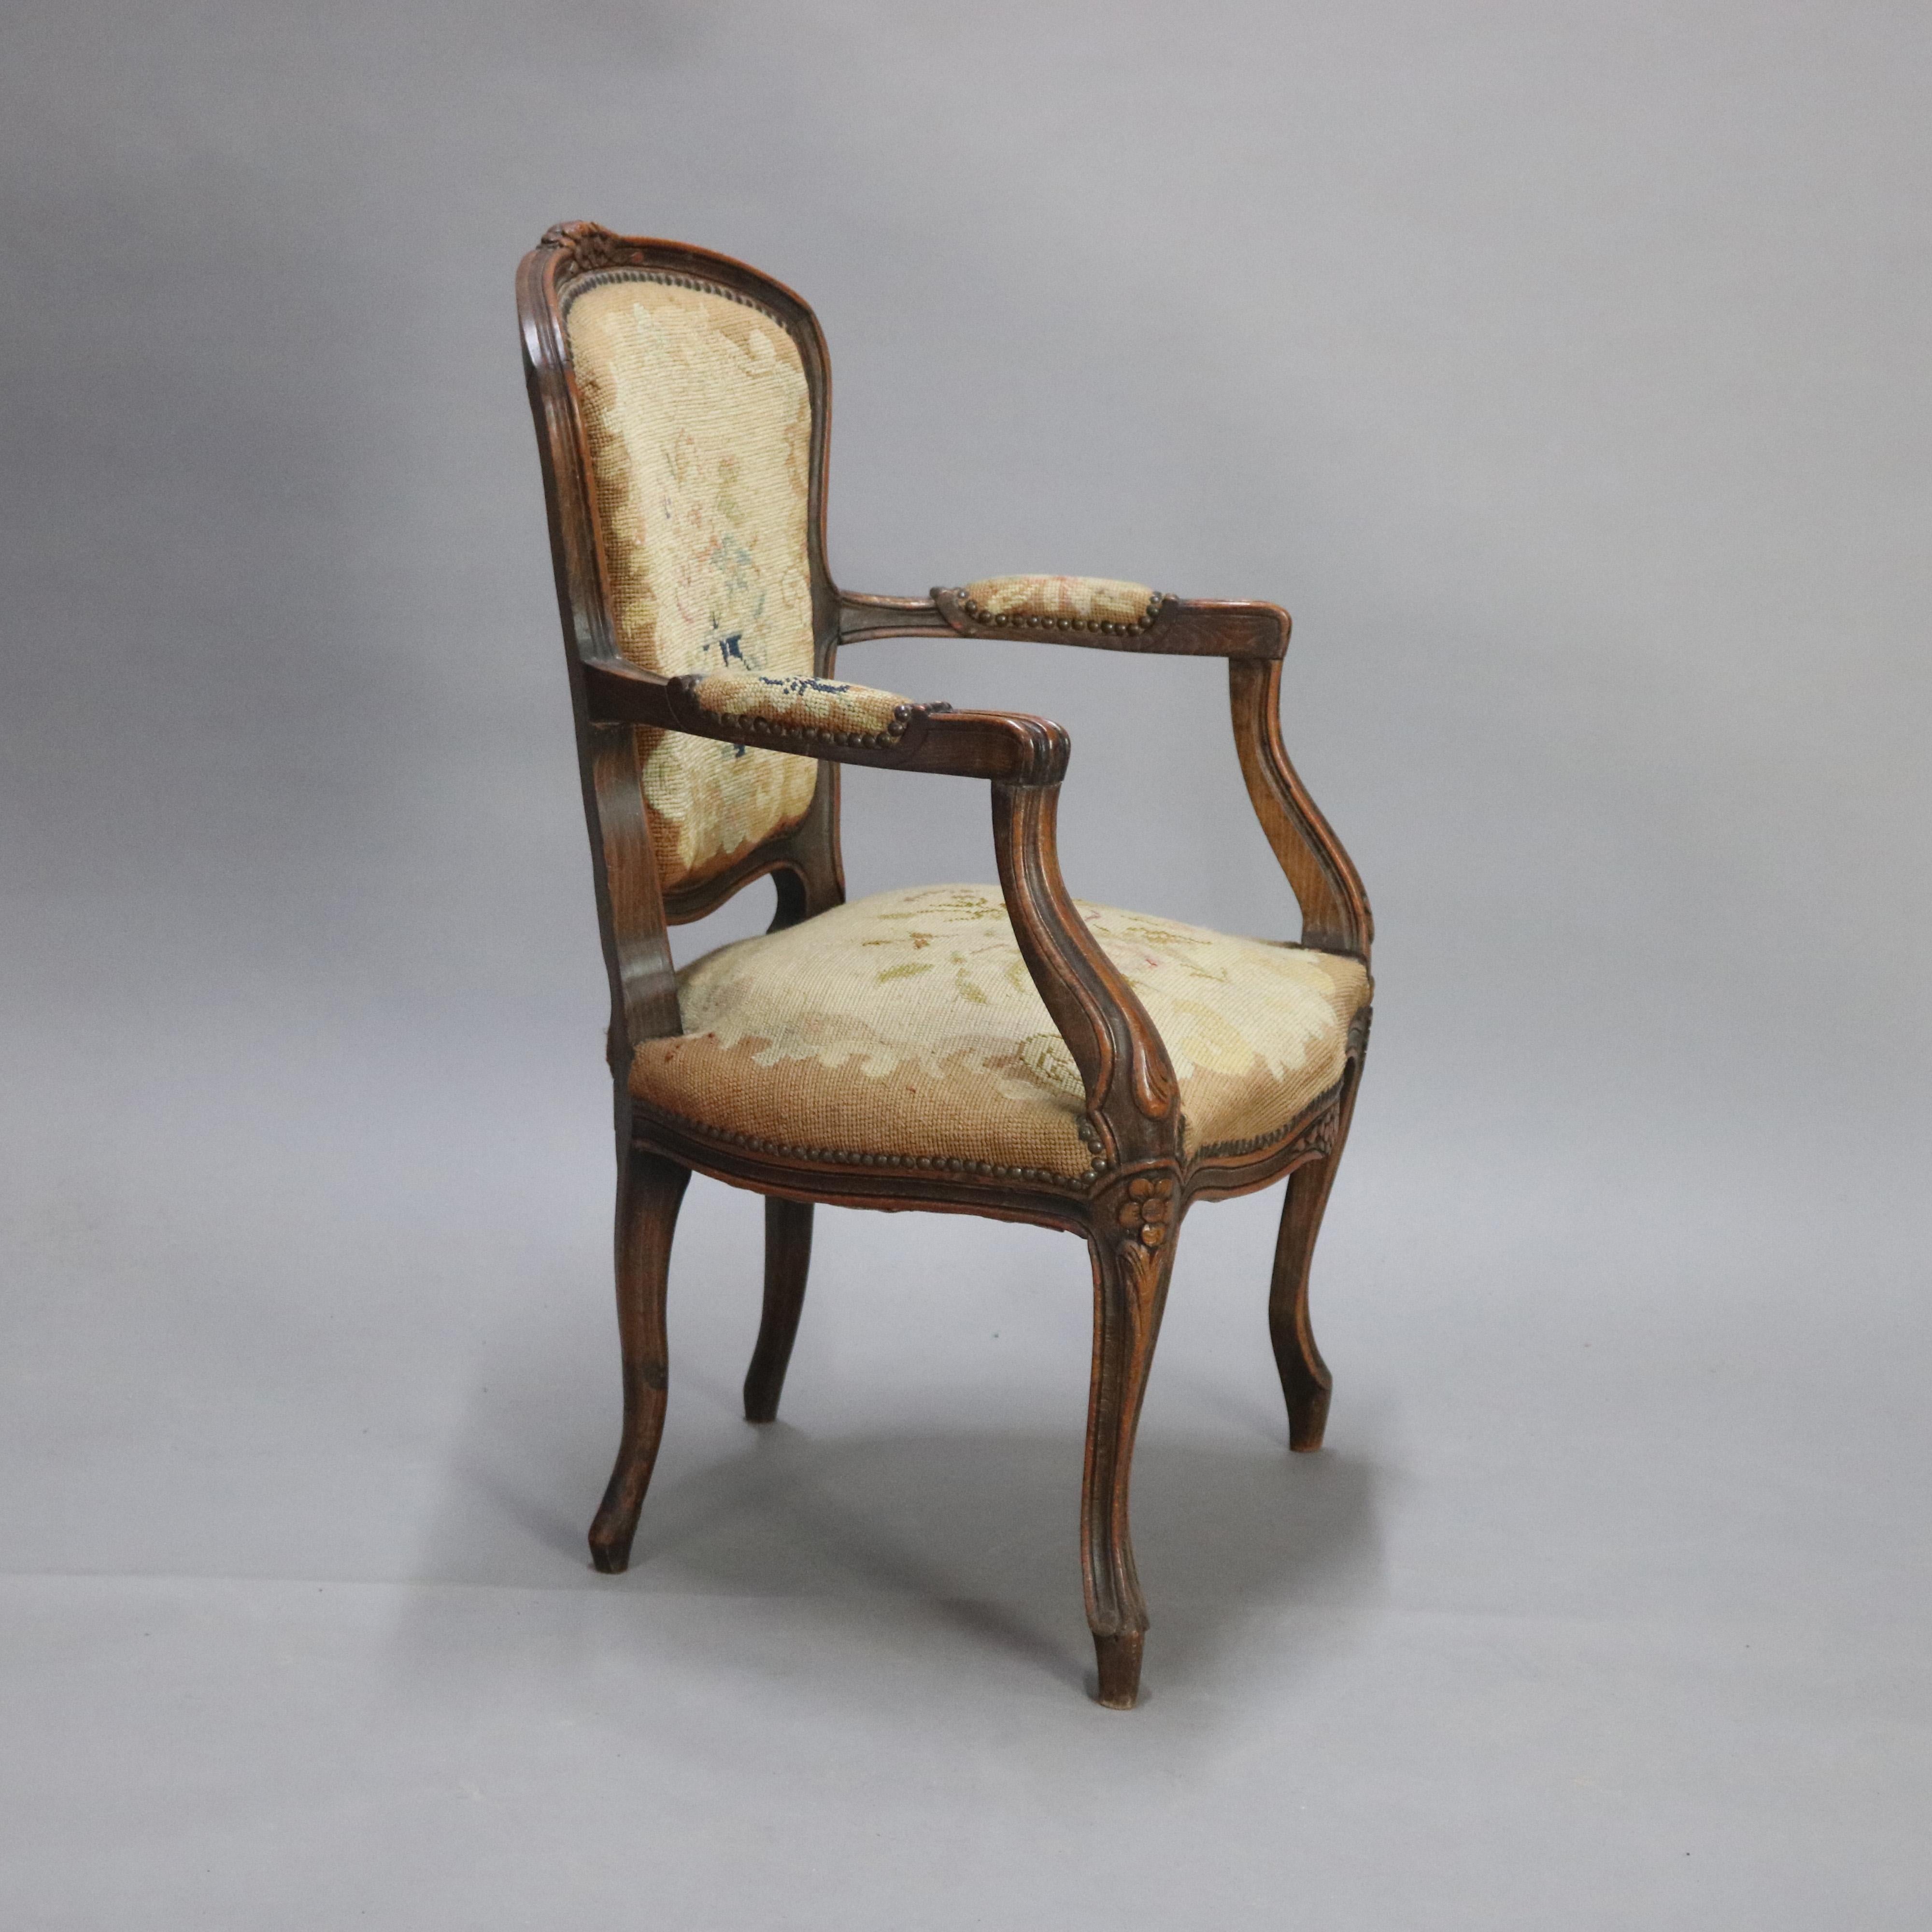 Upholstery Antique French Louis XVI Fruitwood and Needlepoint Fauteuil Armchair, circa 1890